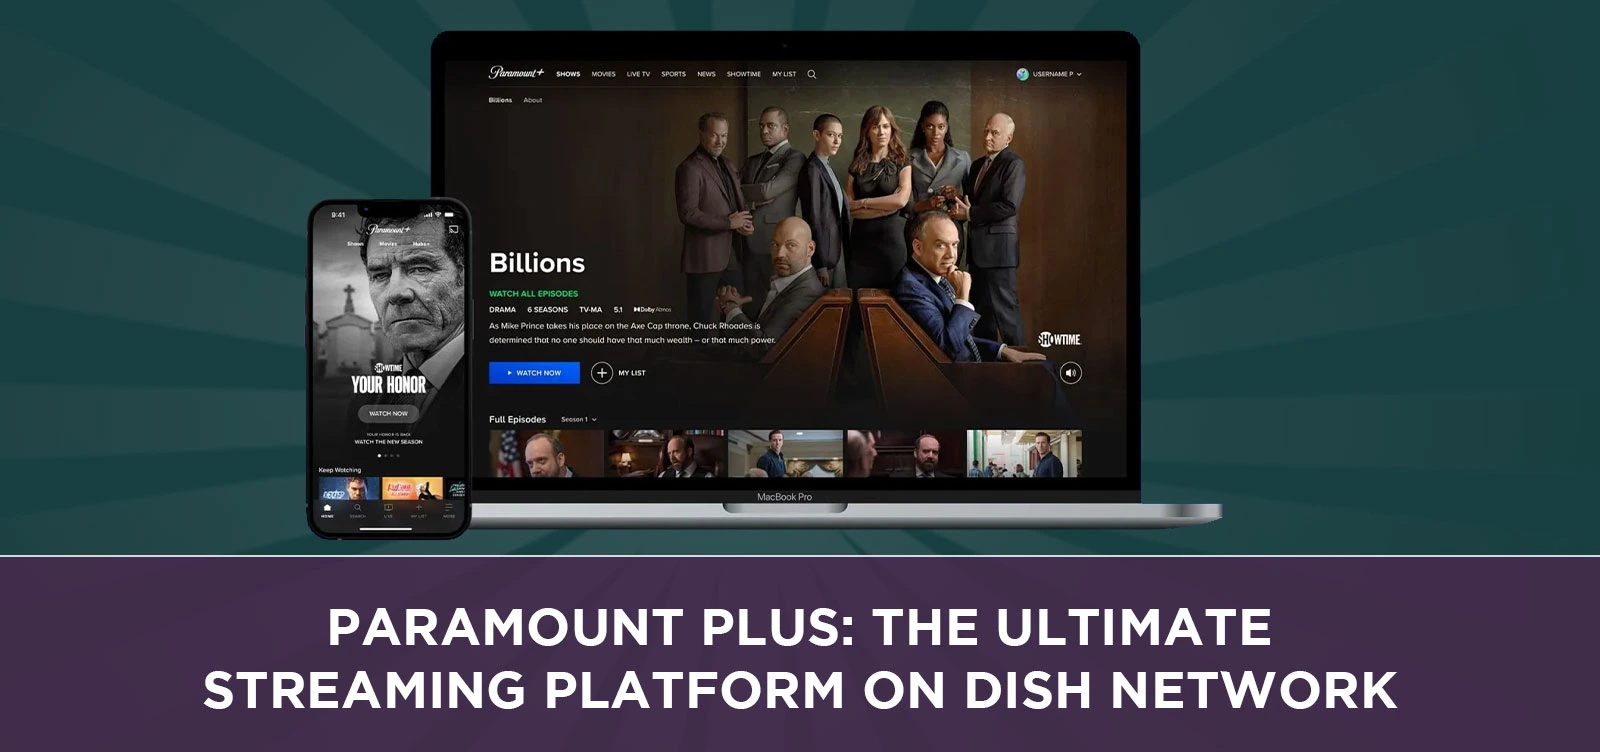 Paramount Plus: The Ultimate Streaming Platform on Dish Network